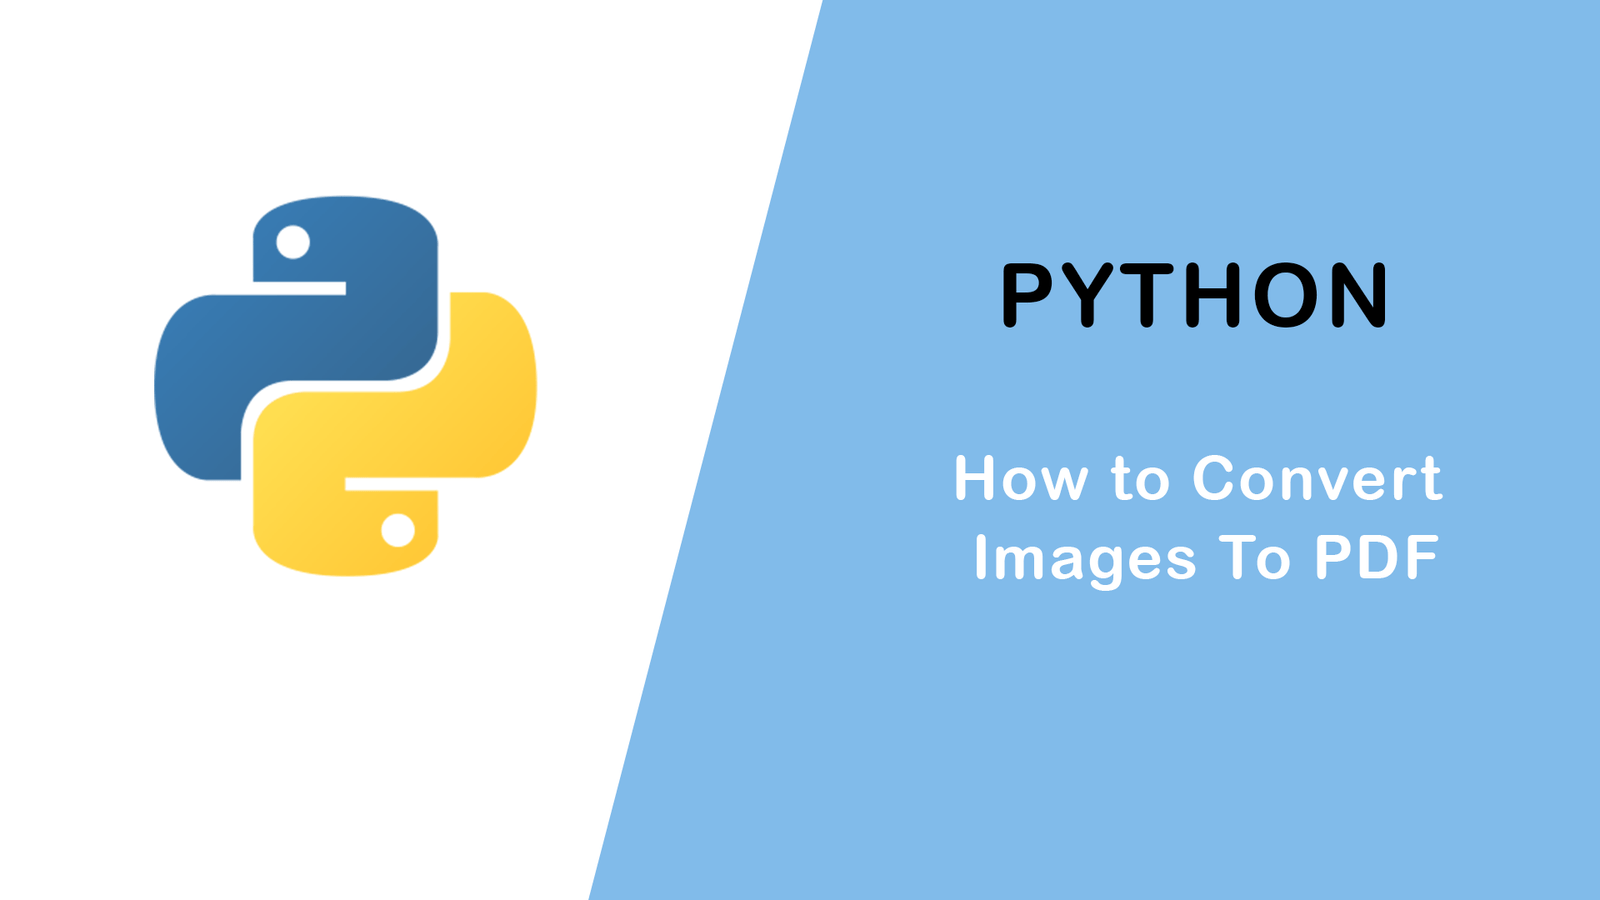 How to Convert Images To PDF using Python